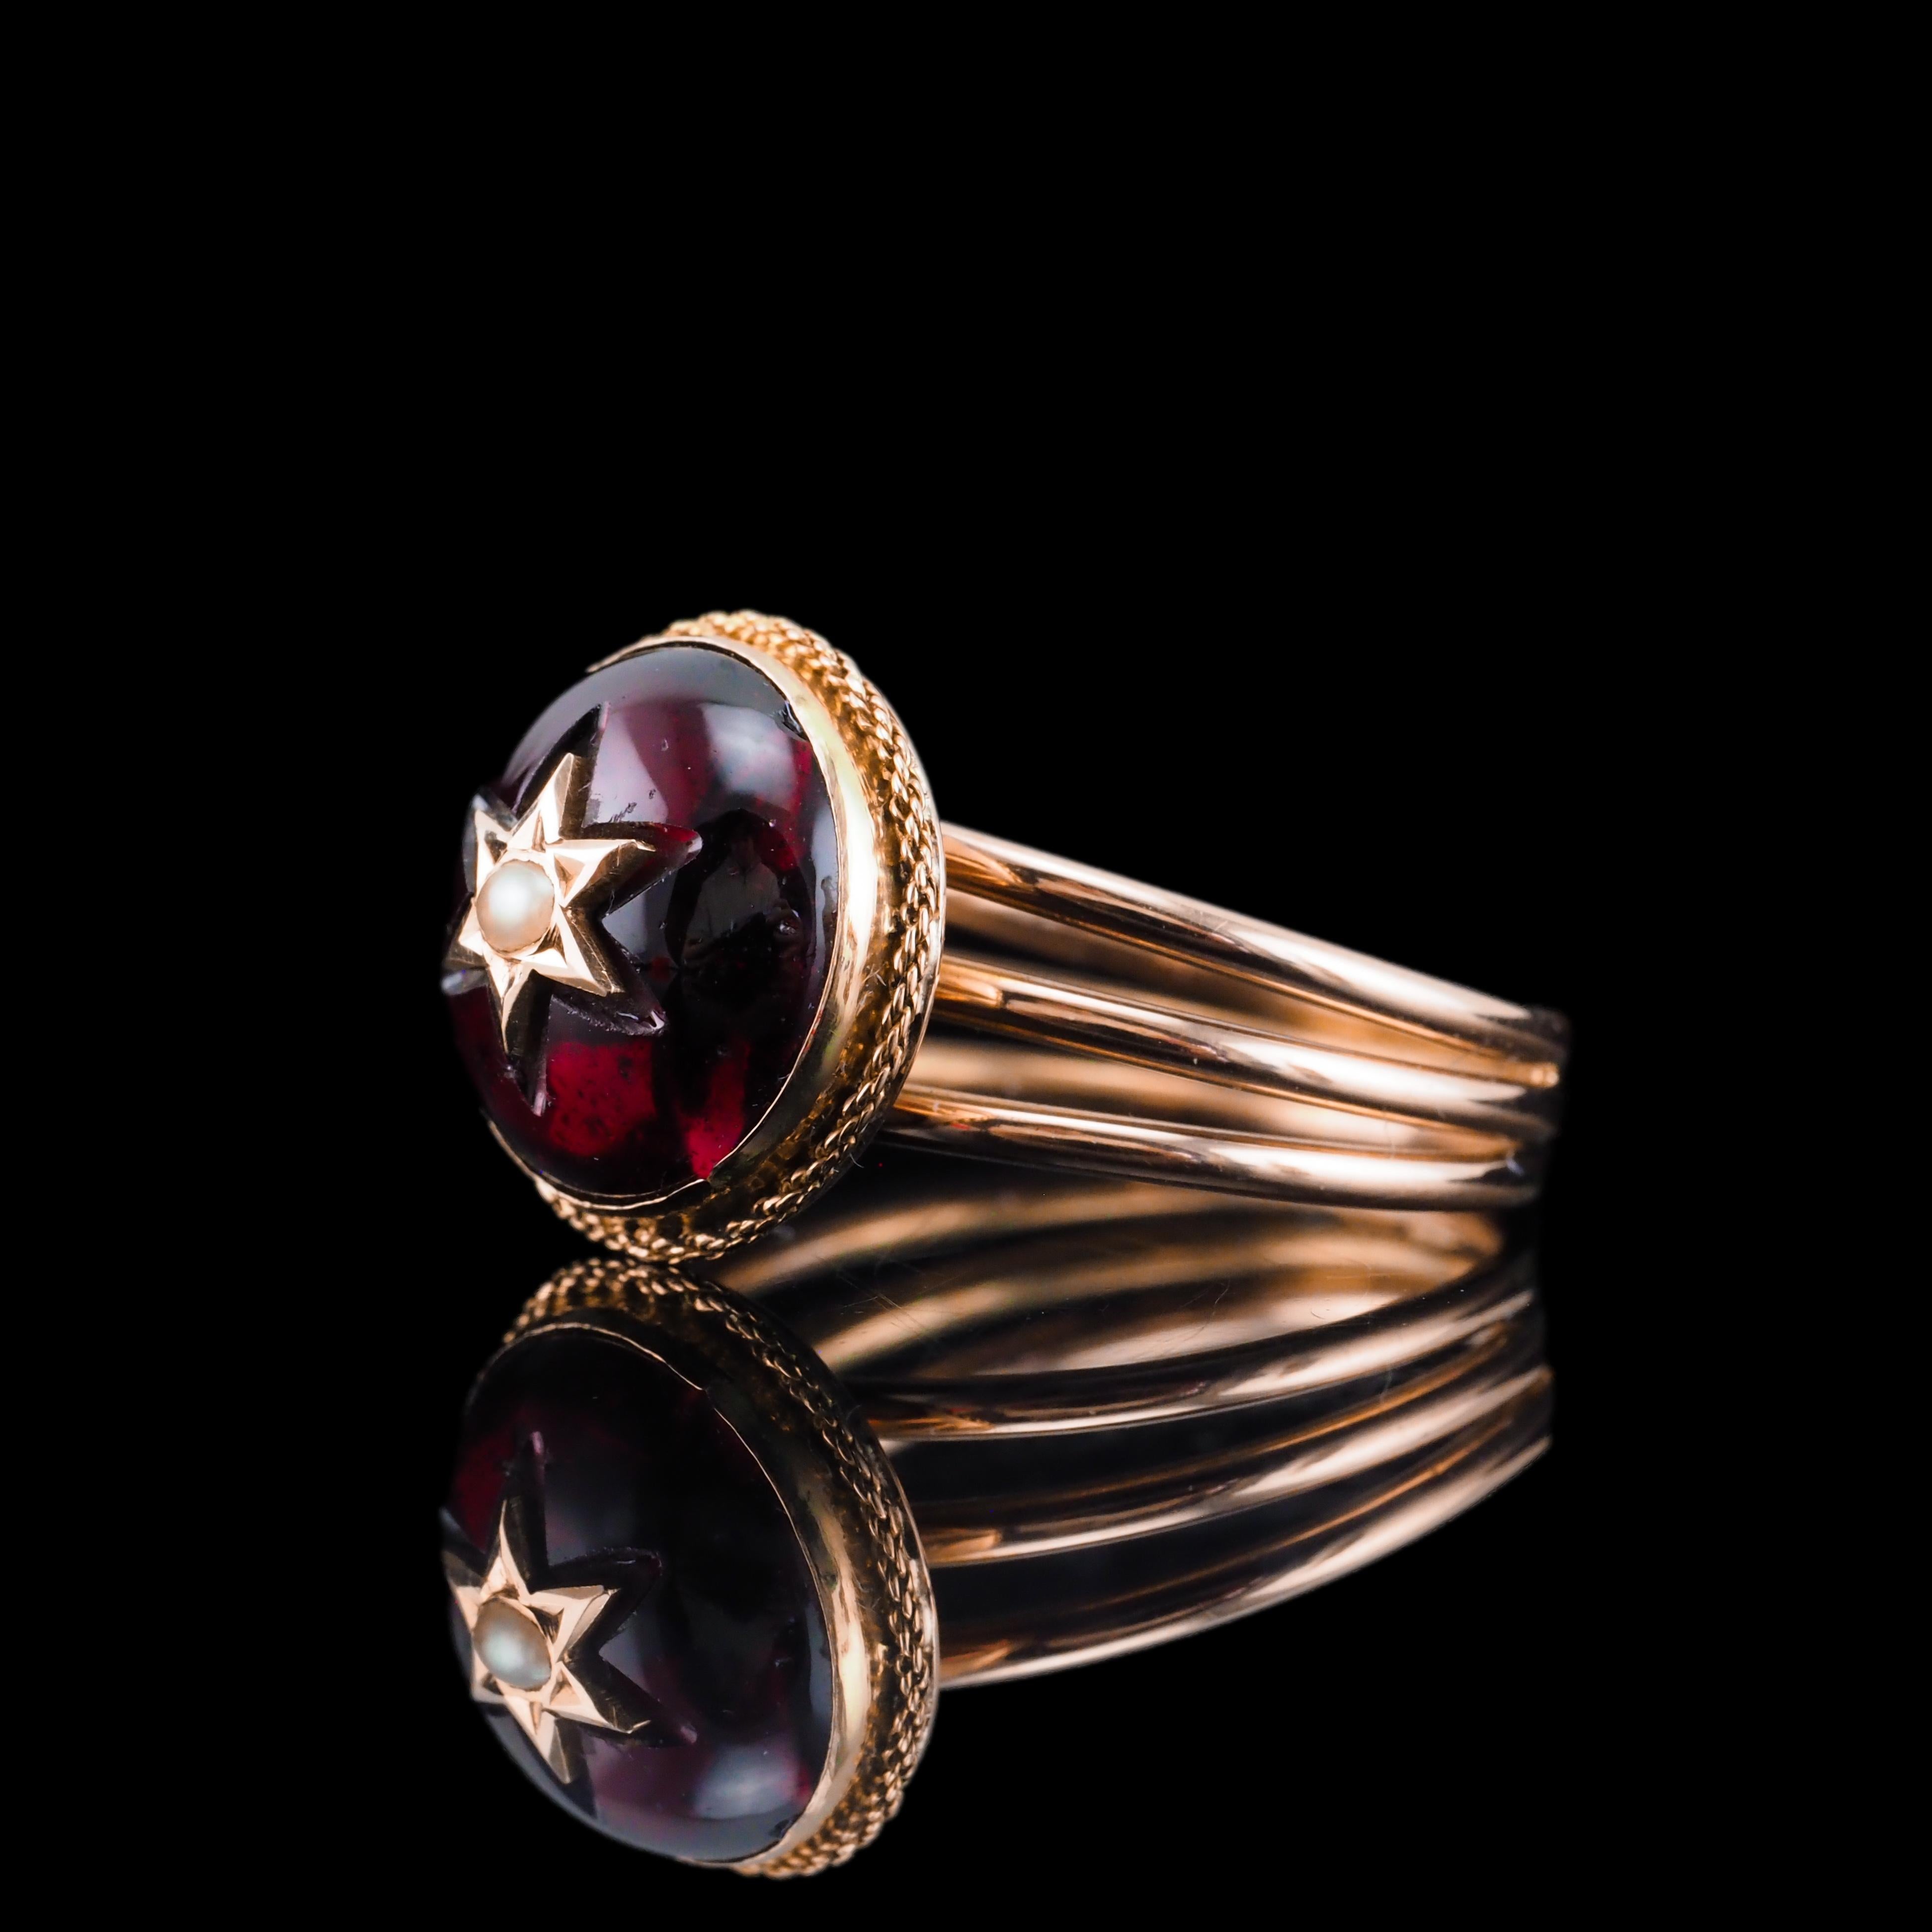 Antique Victorian 14K Gold Garnet Star Cabochon Ring with Seed Pearl - c.1880 For Sale 3